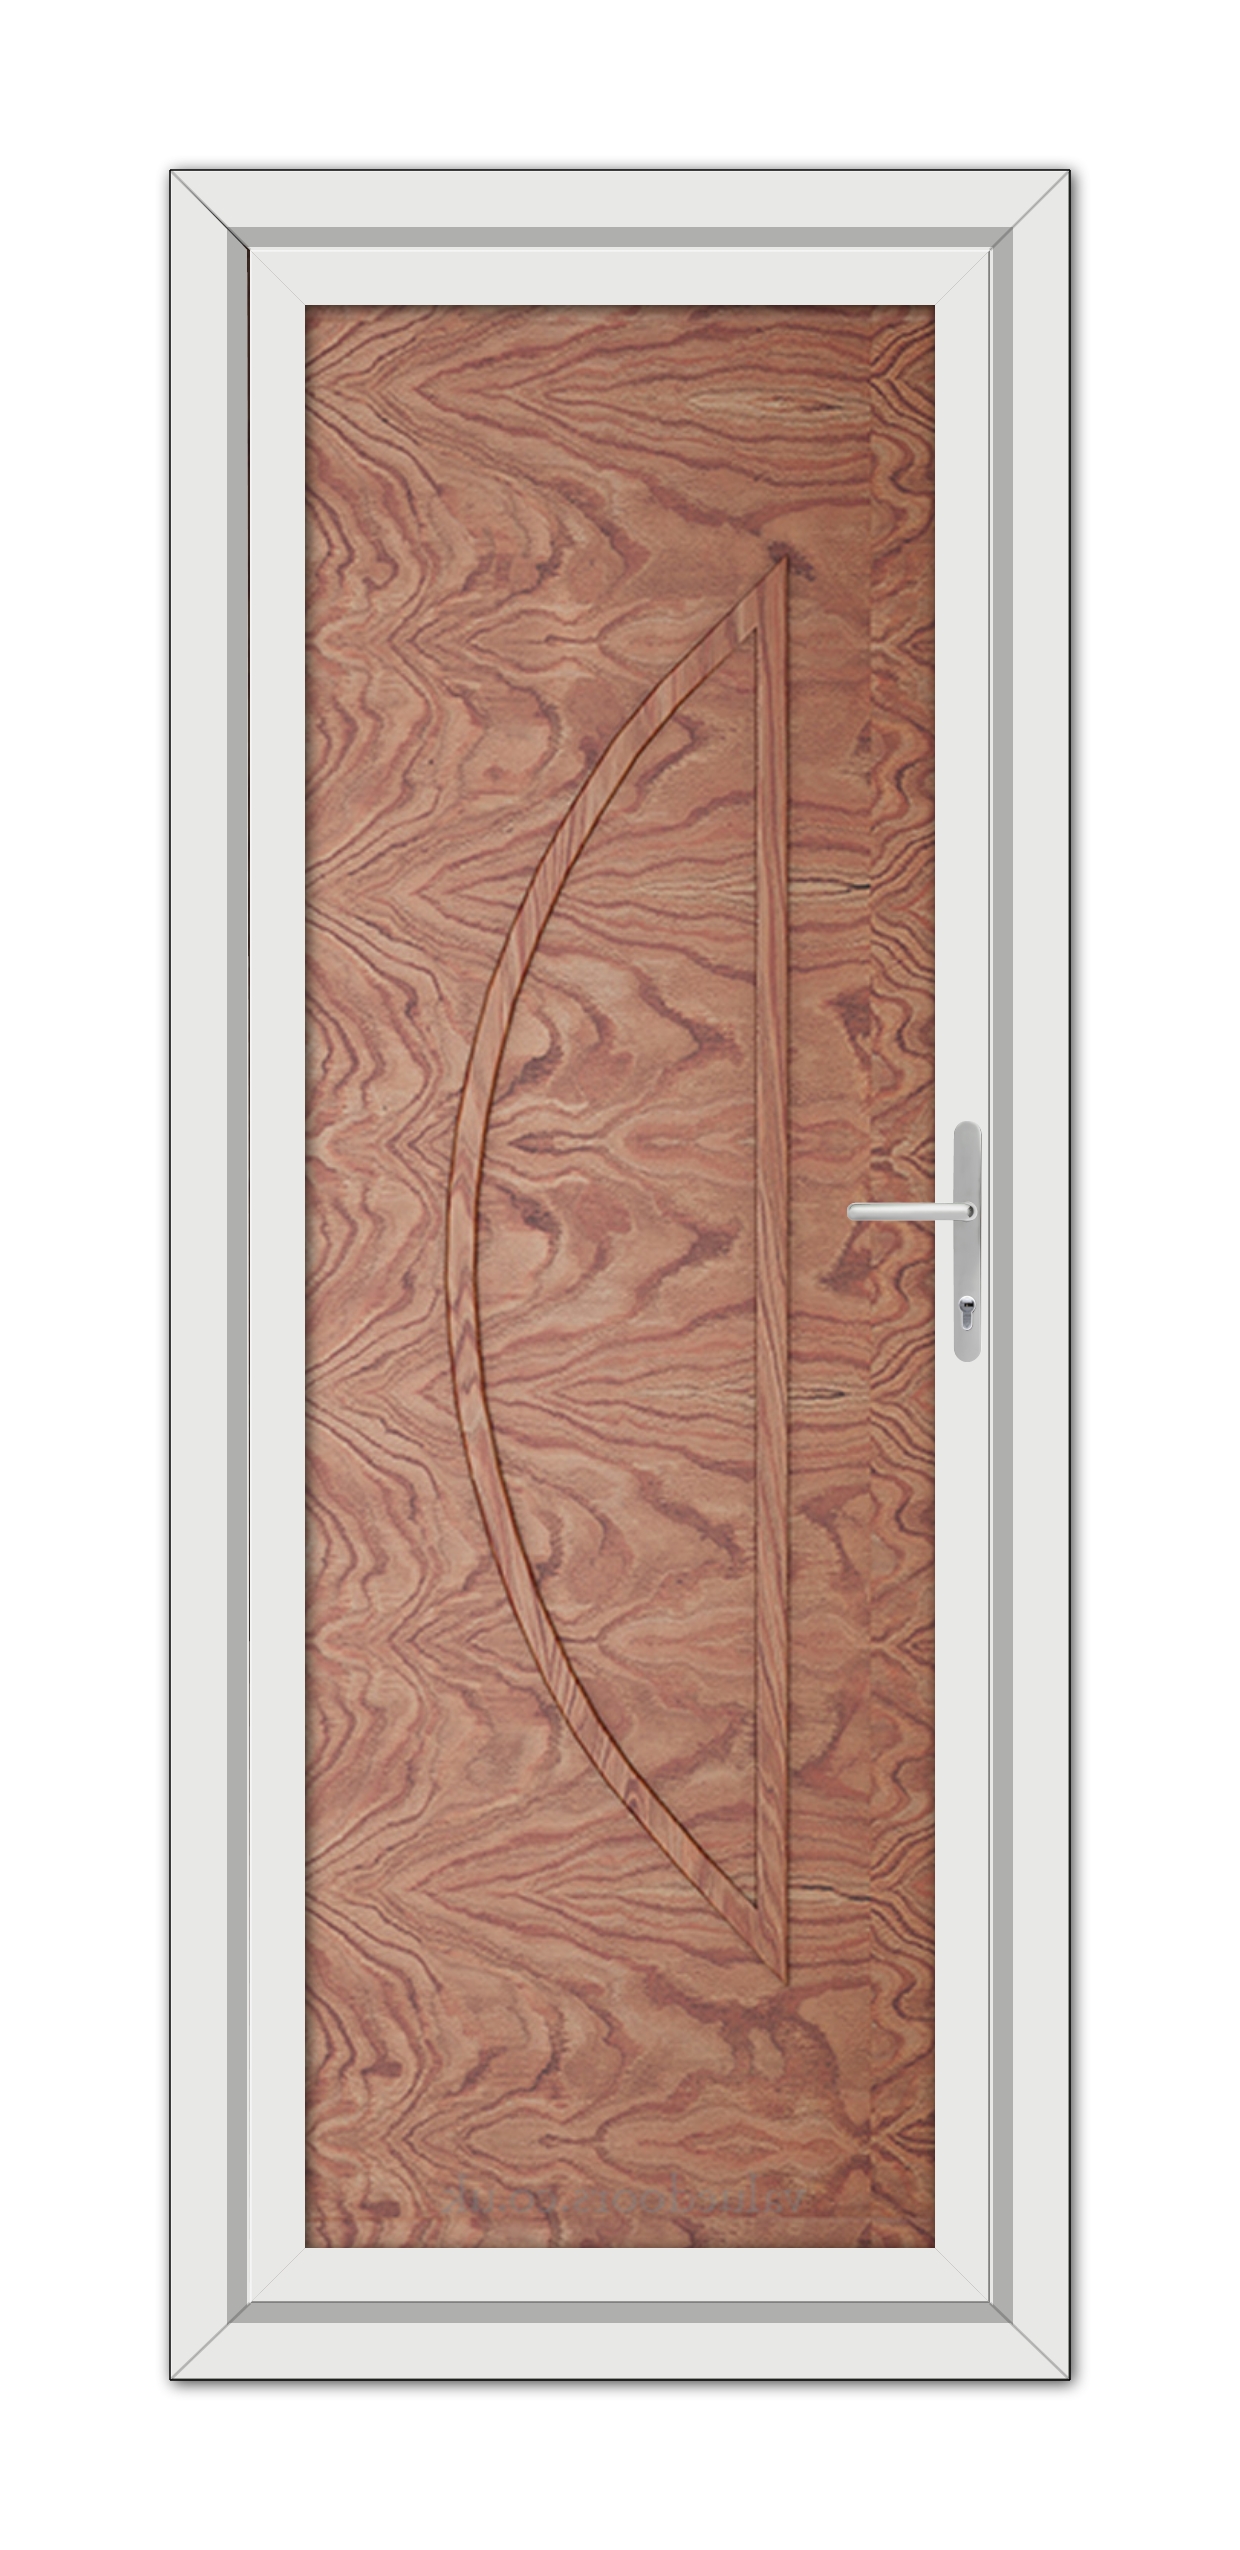 A Solid Oak Modern 5051 Solid uPVC Door with a bow-shaped wooden panel design and a metal handle, encased in a white frame.